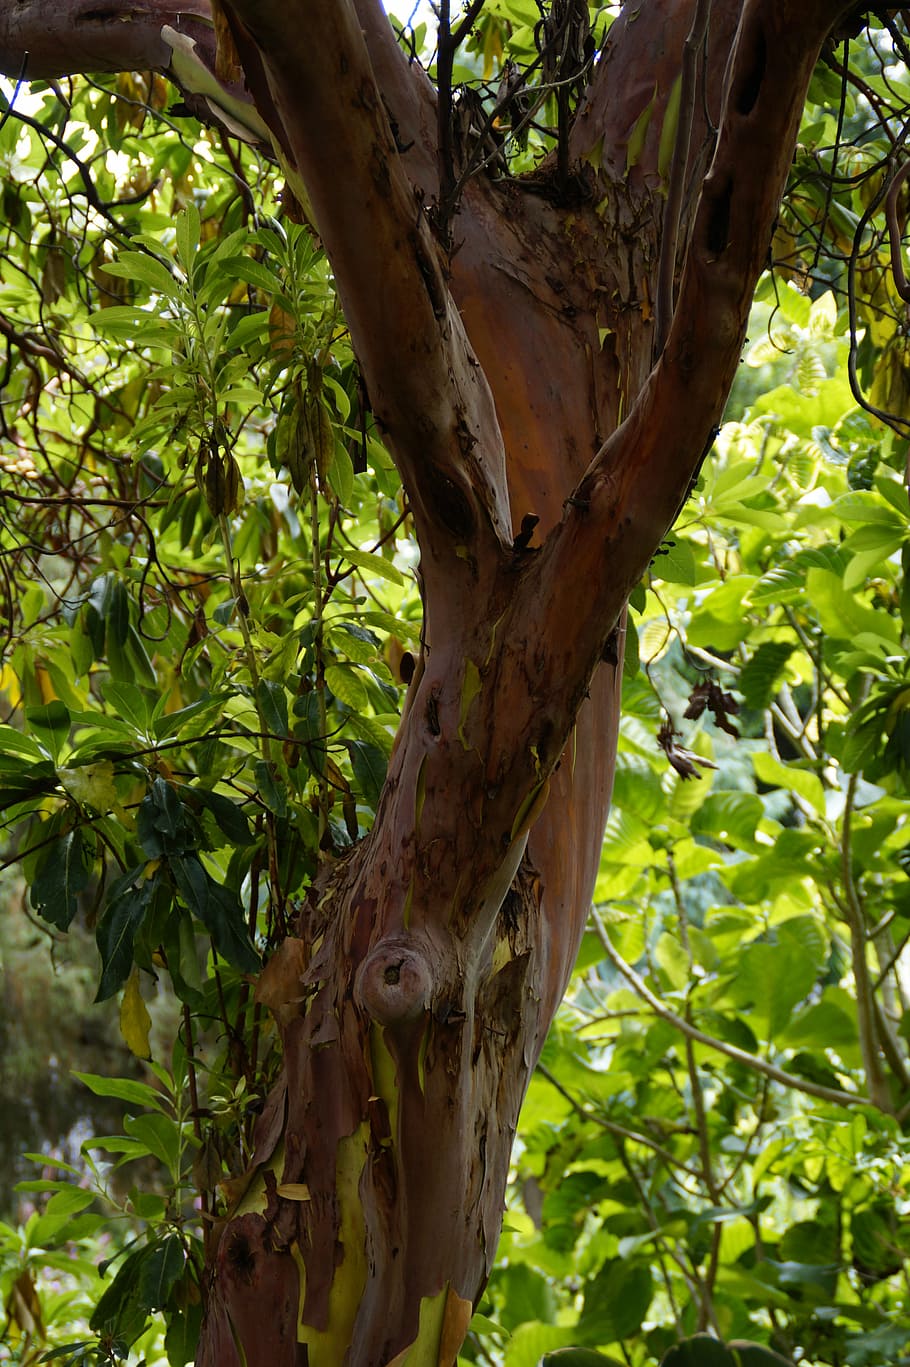 arbutus canariensis, tree, canary islands, endemic, tenerife, strawberry tree, bark, reddish, red brown, replace